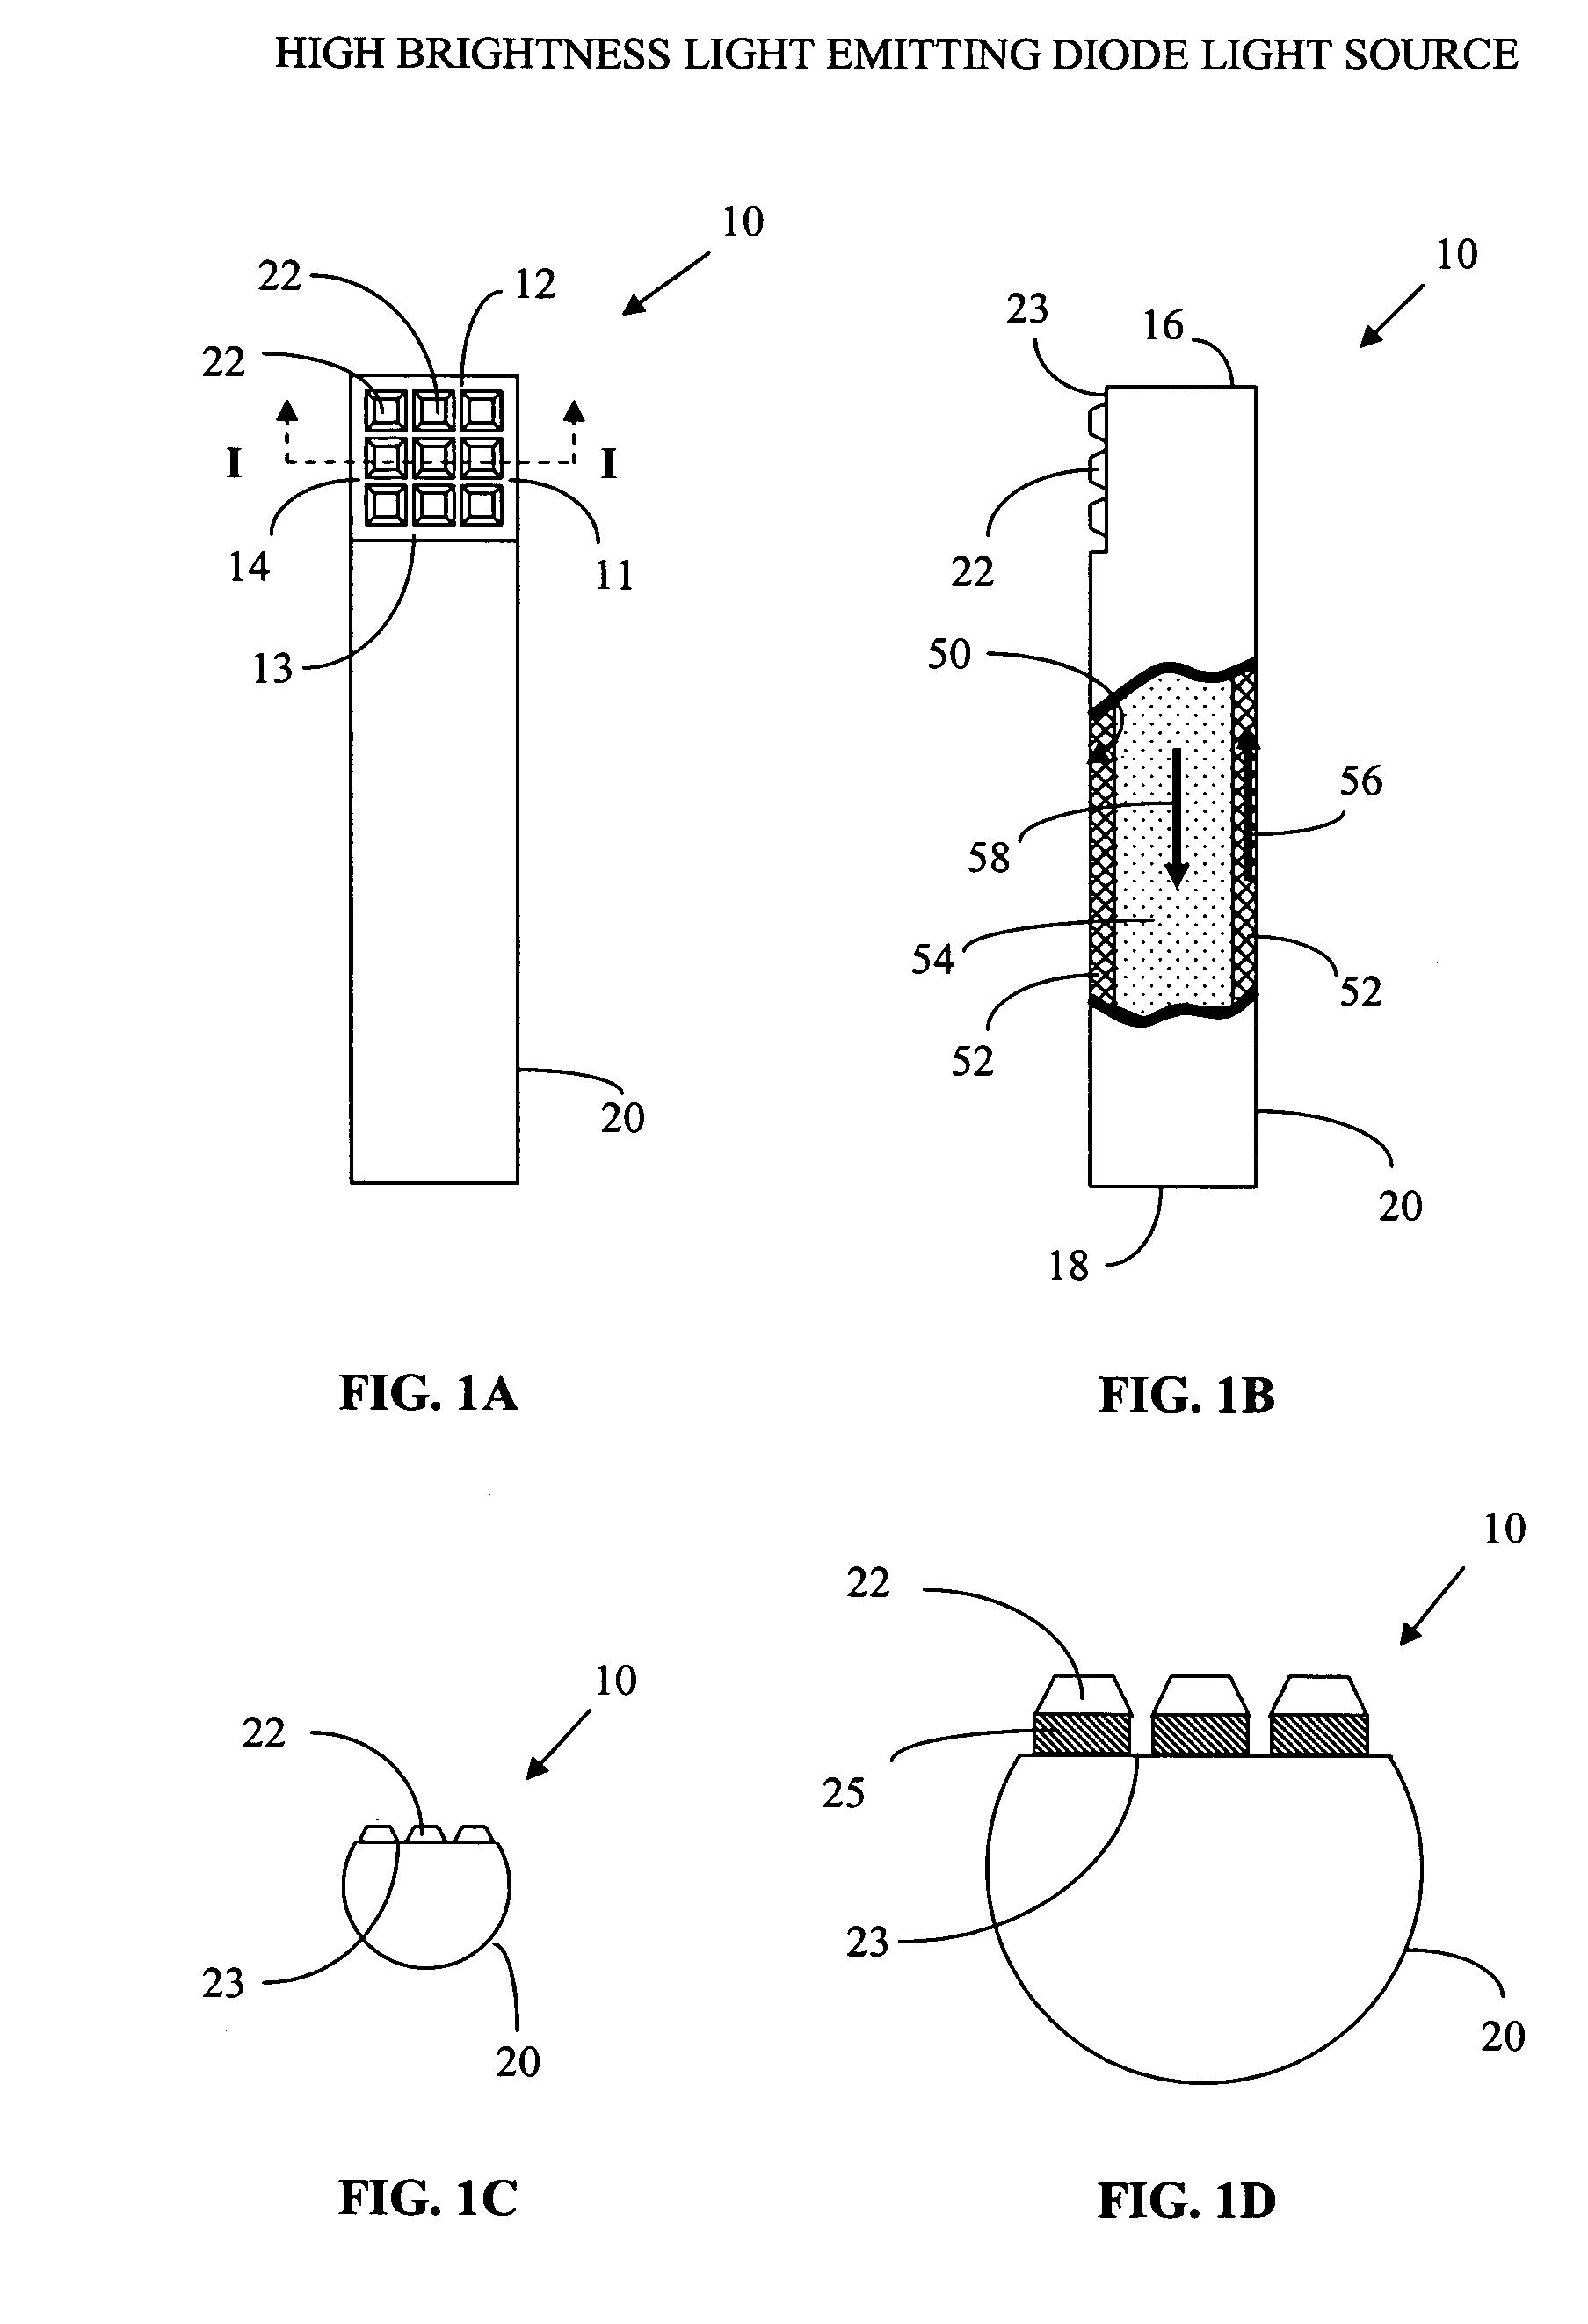 Light emitting diode light source with heat transfer means